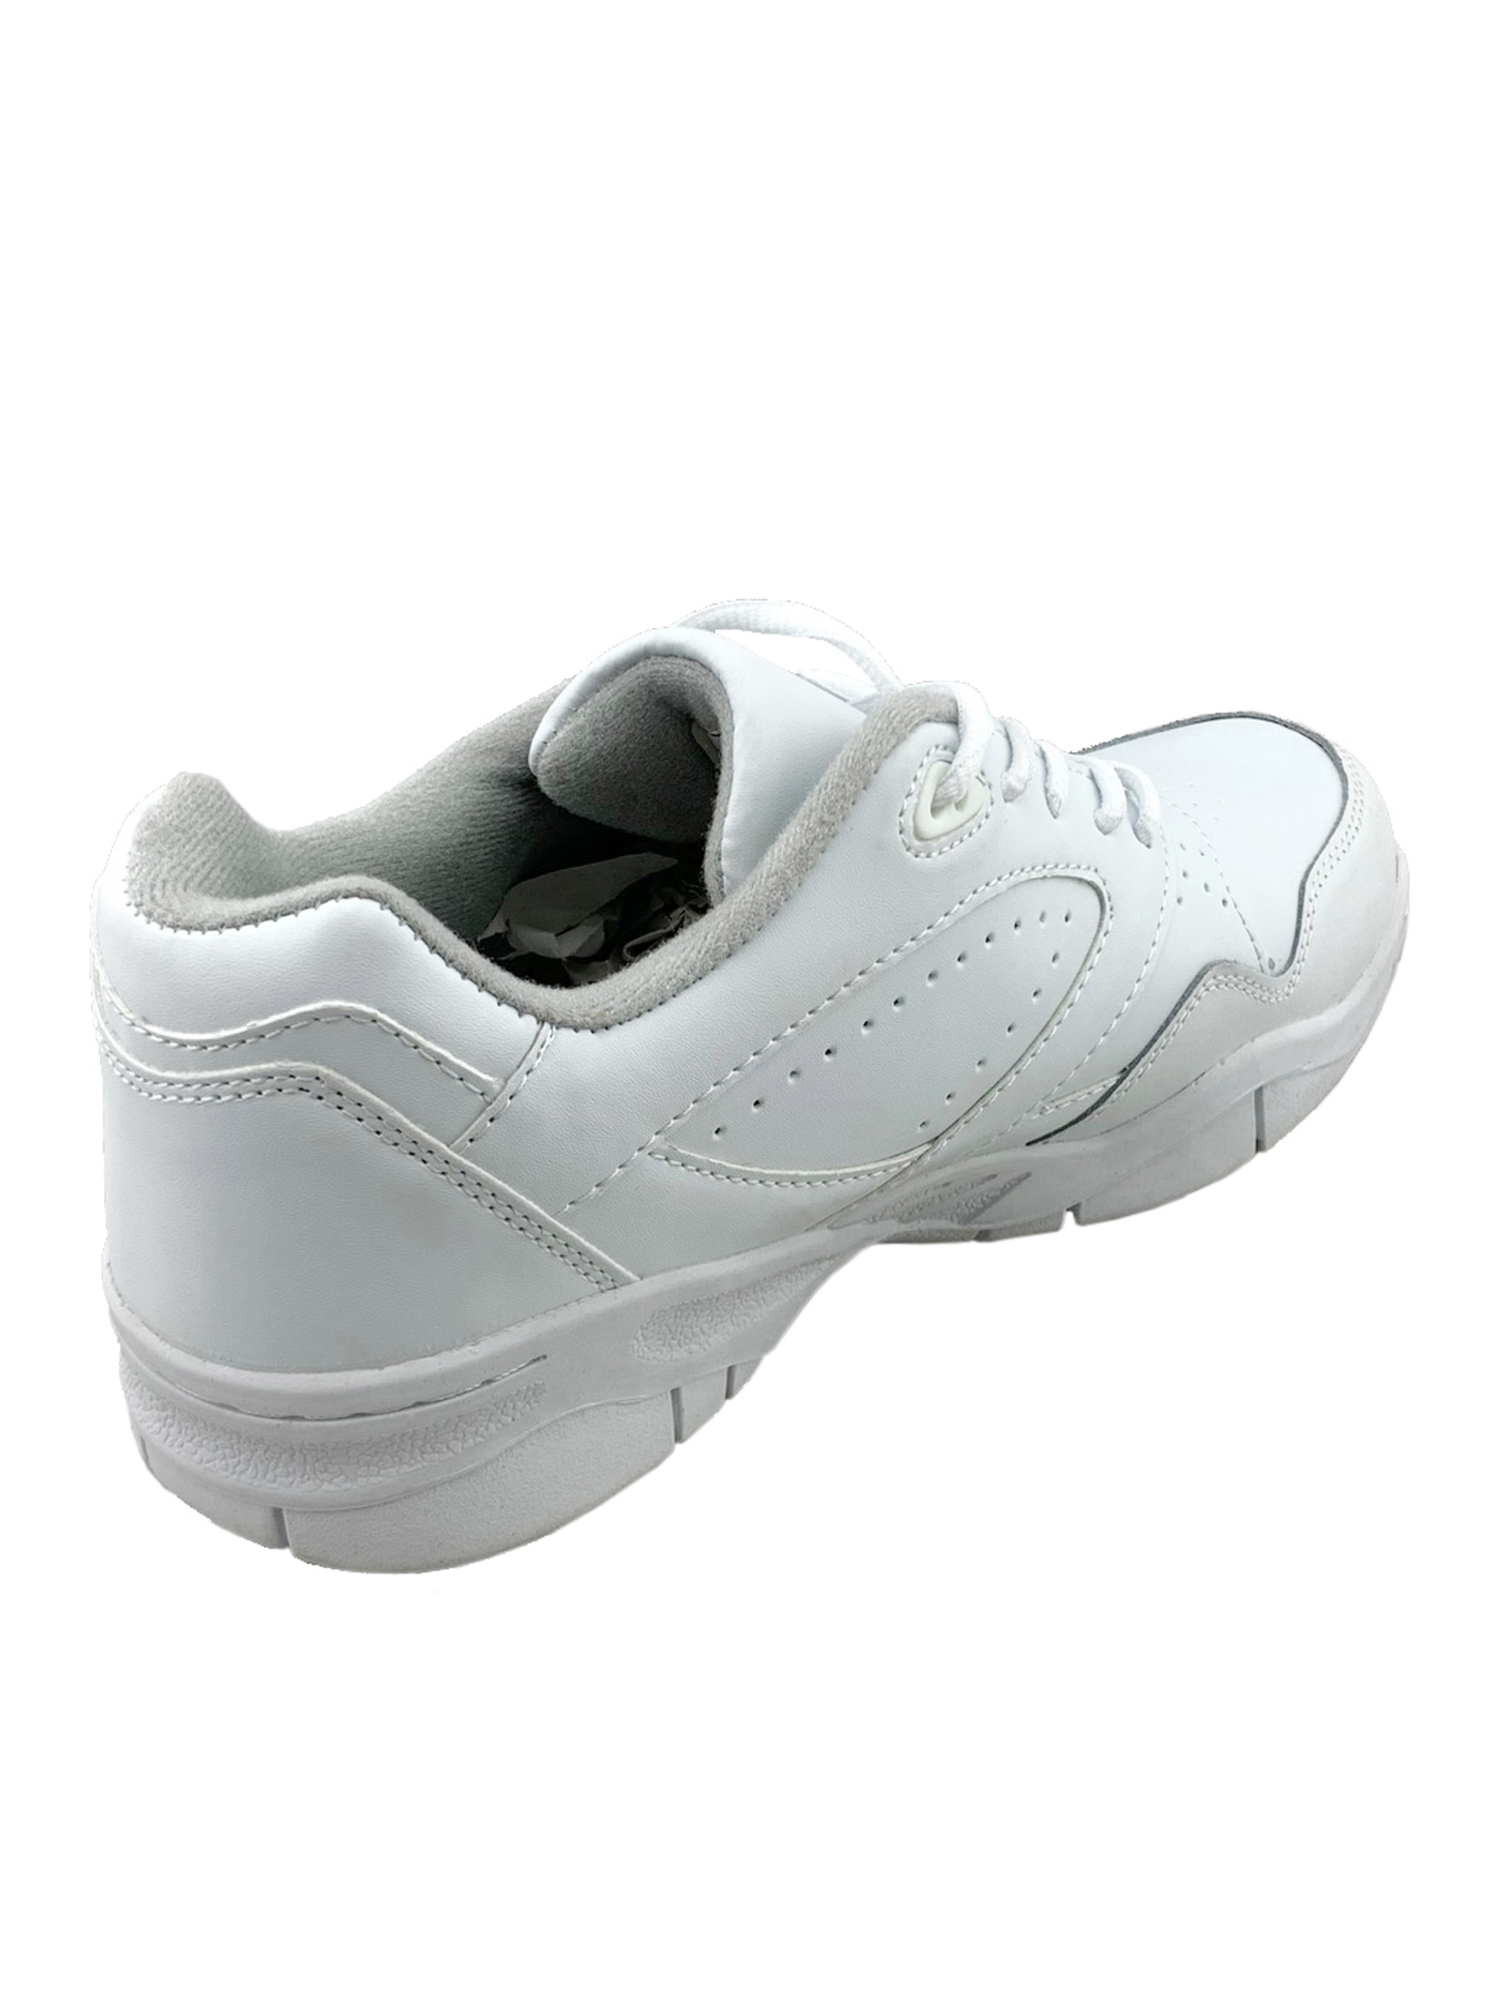 Tanleewa Men's Leather White Sports Shoes Lightweight Sneakers Breathable Casual Shoe Size 6 - image 5 of 5